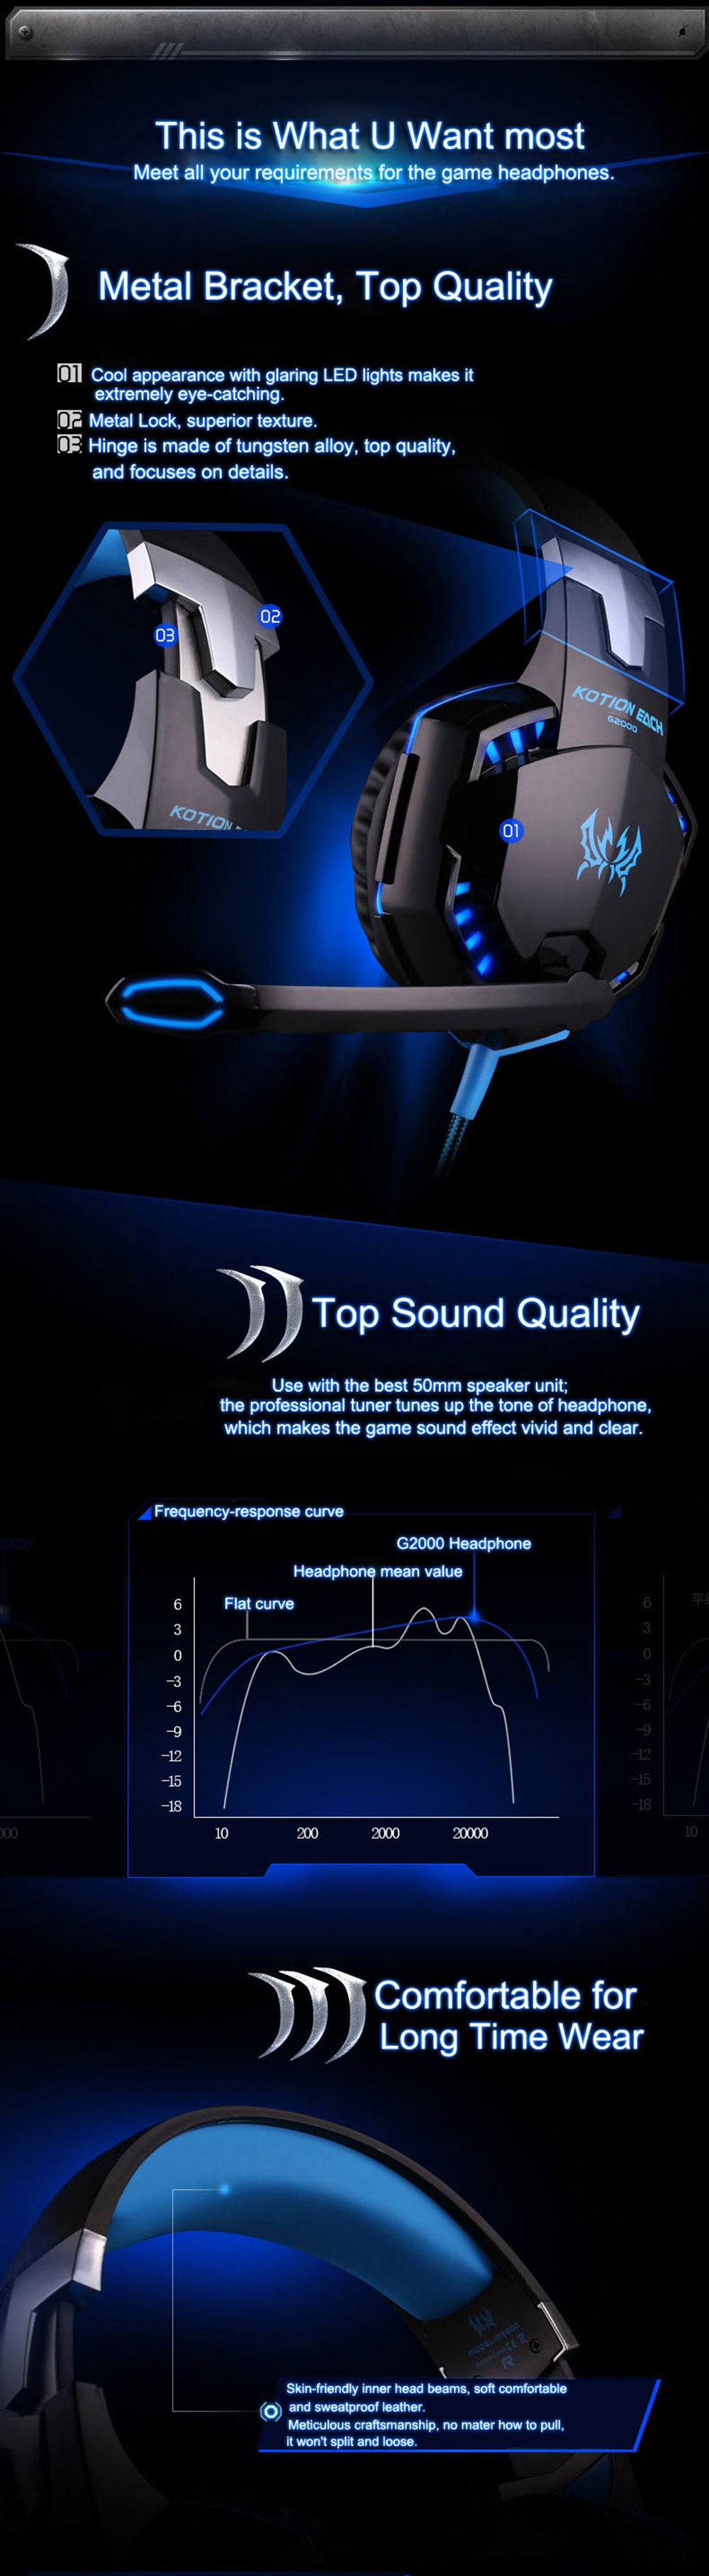 Headset + Mouse Combo